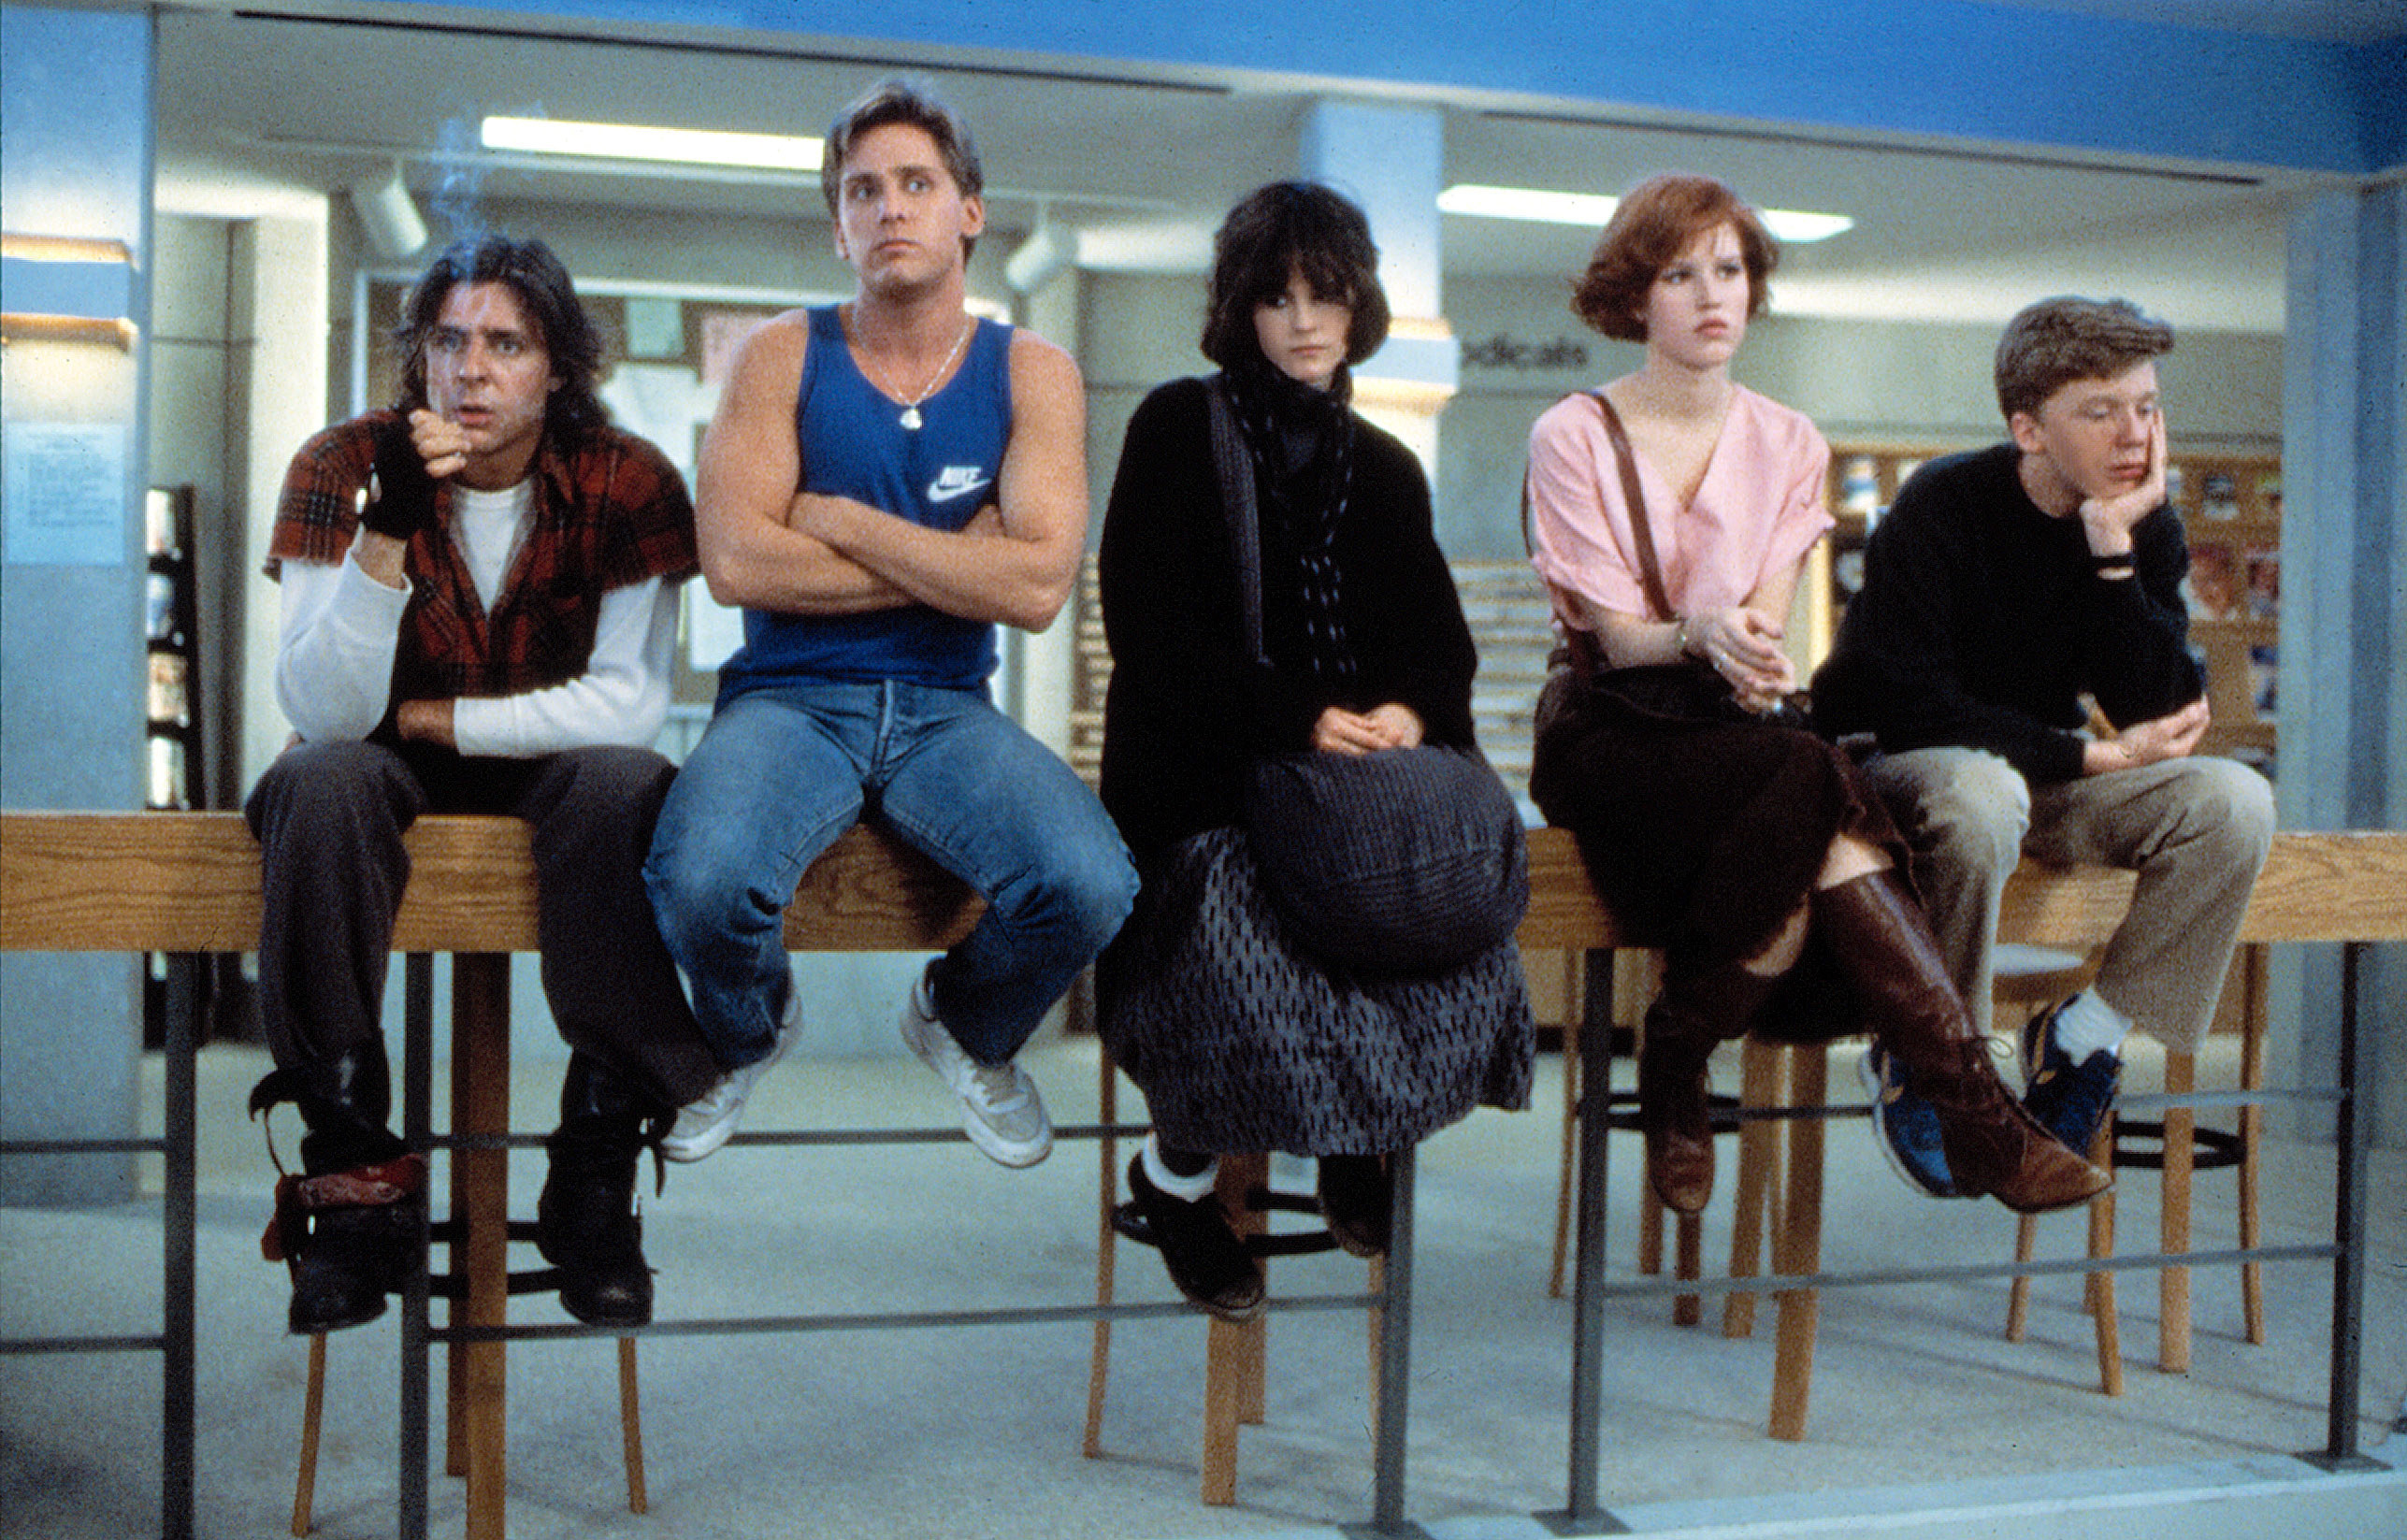 Judd Nelson, Emilio Estevez, Ally Sheedy, Molly Ringwald, and Anthony Michael Hall sit on a table